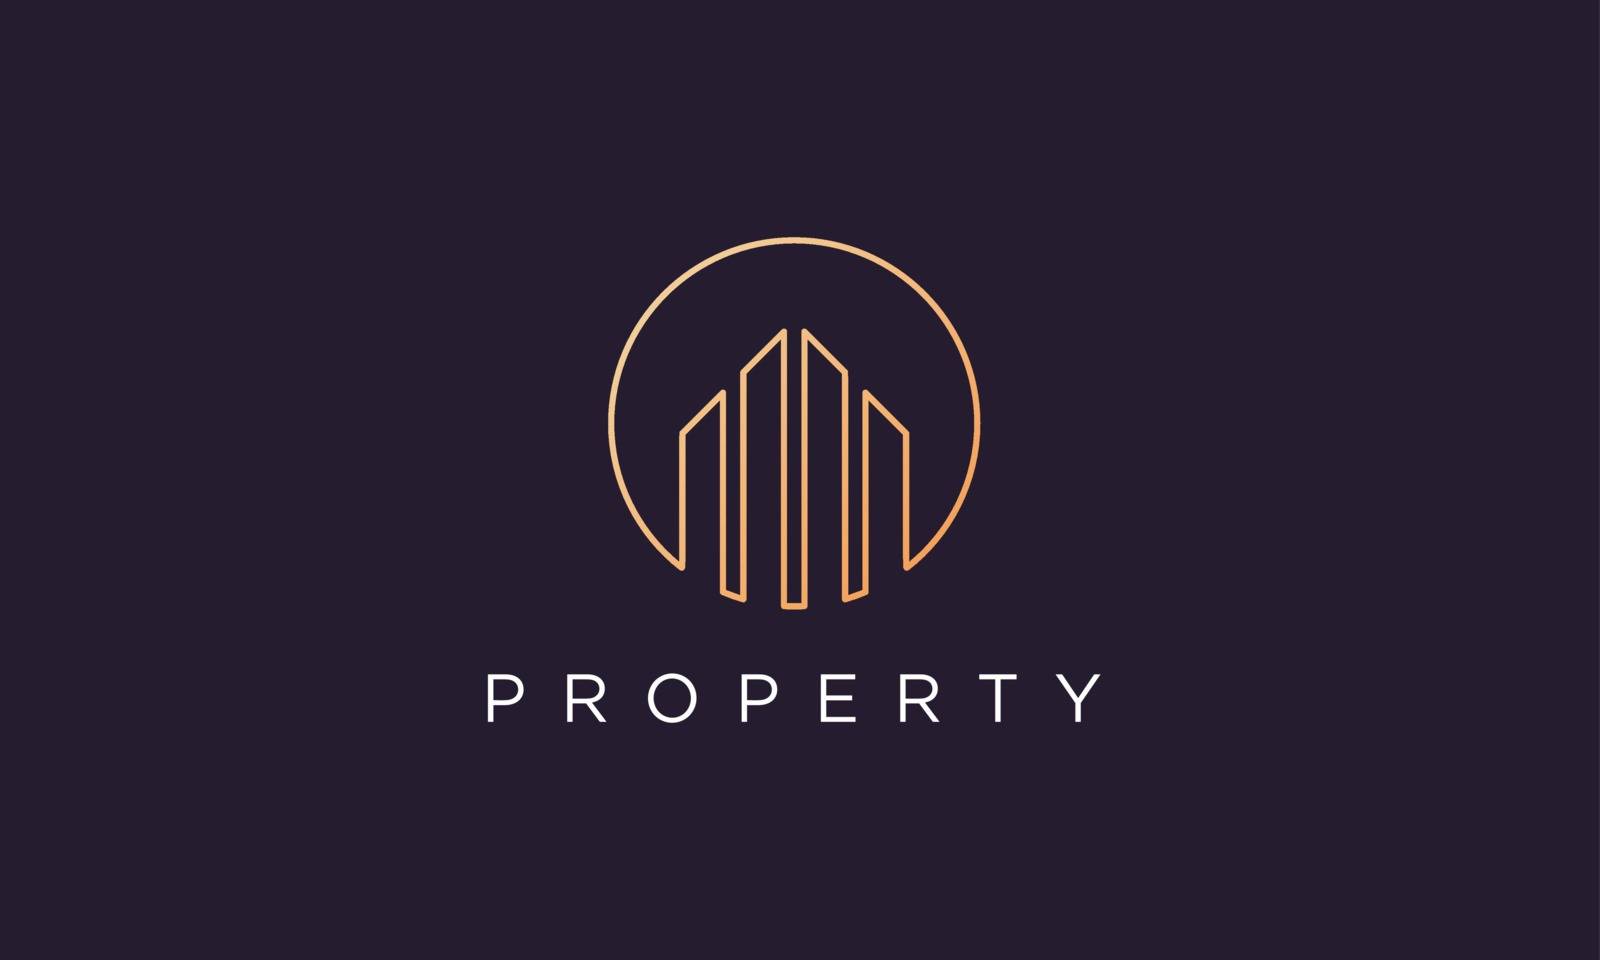 luxury and classy logo design for real estate agent in a simple and modern style by murnifine